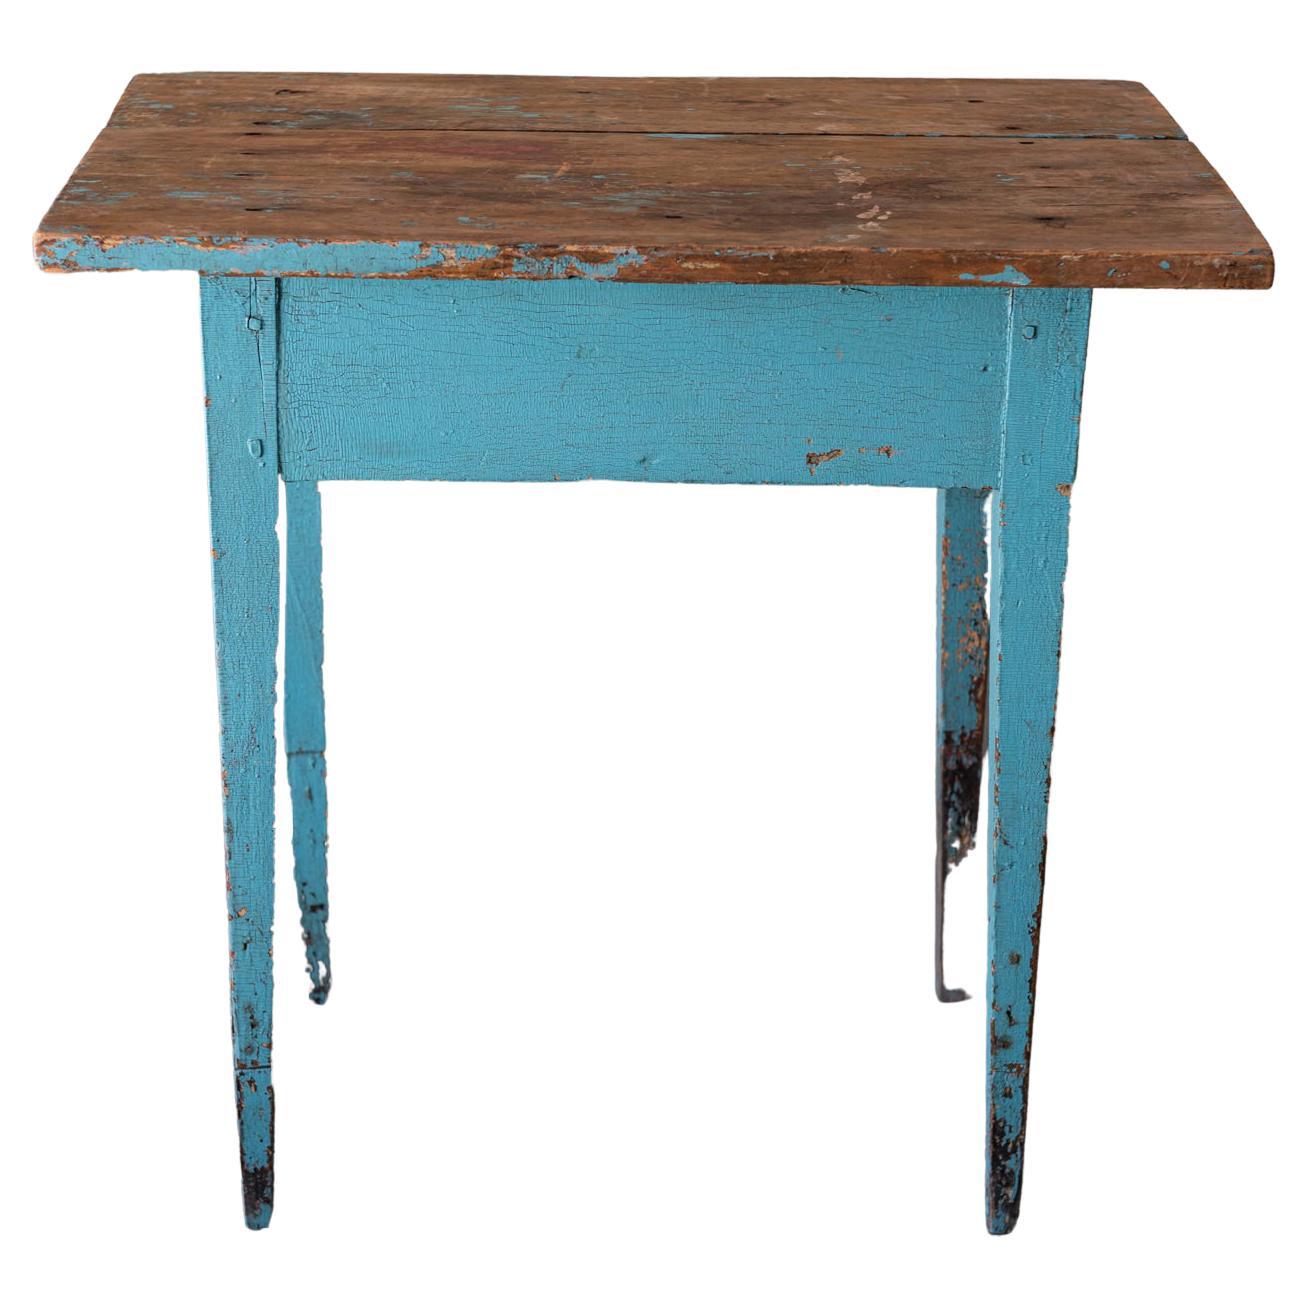 19thC Country Rustic Painted Side Table